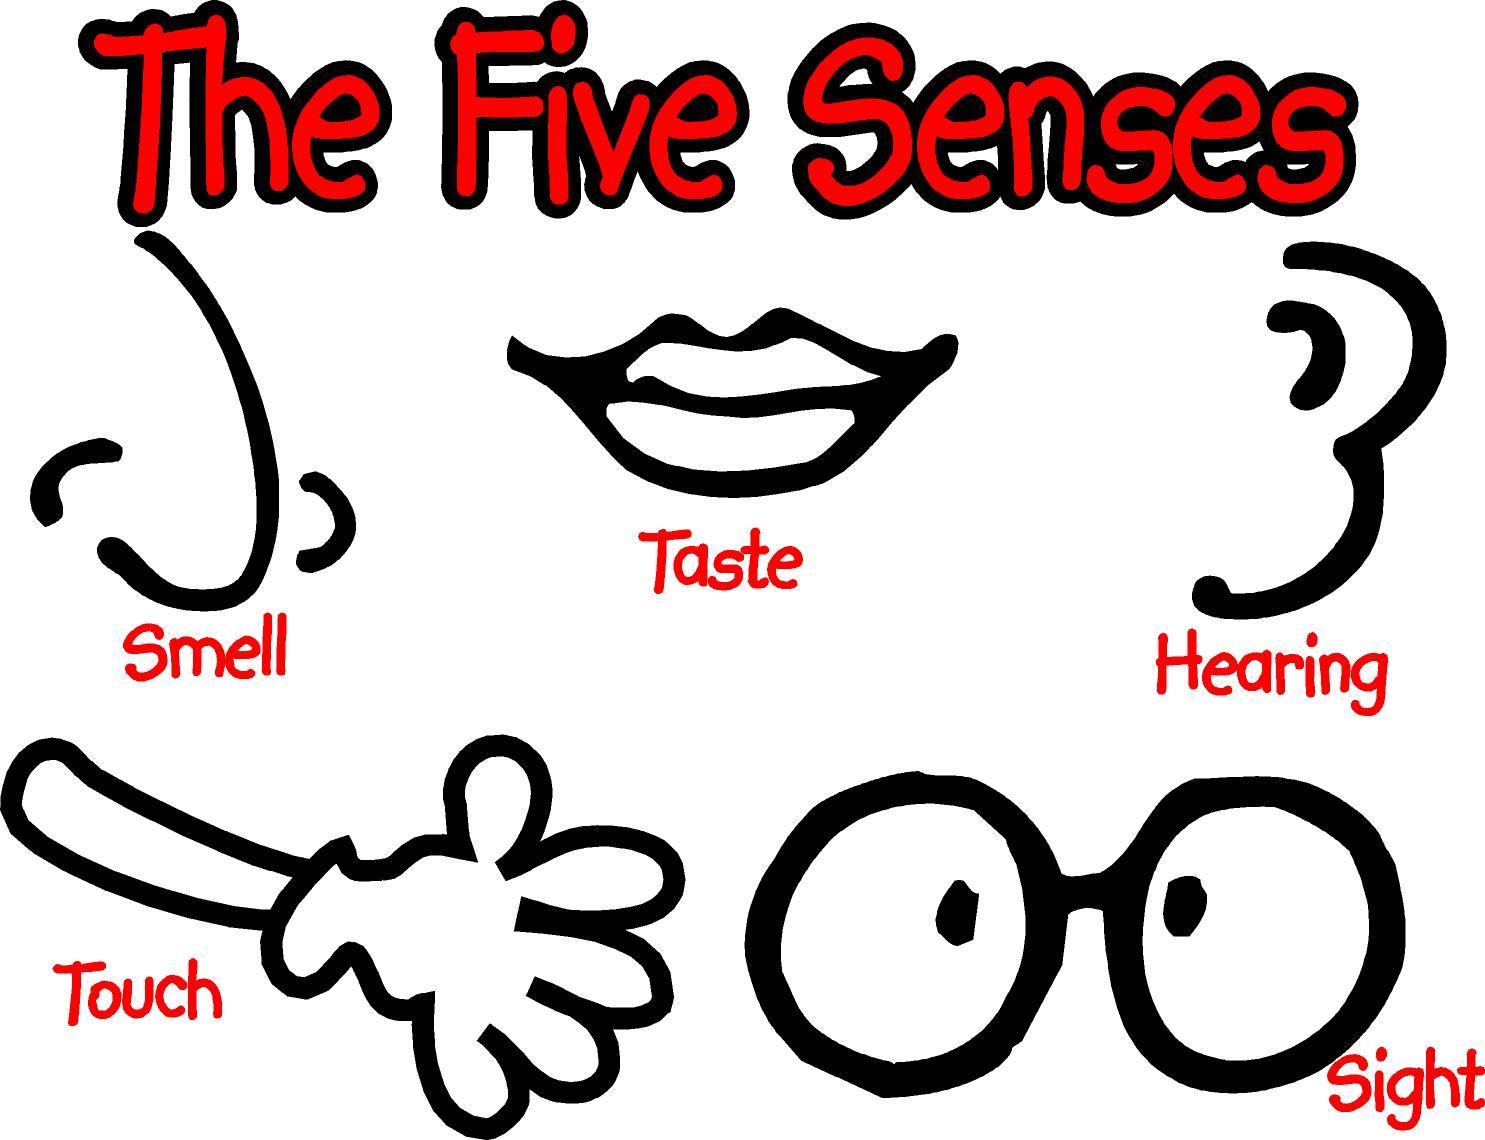 Appealing on library of. 5 senses clipart clip art